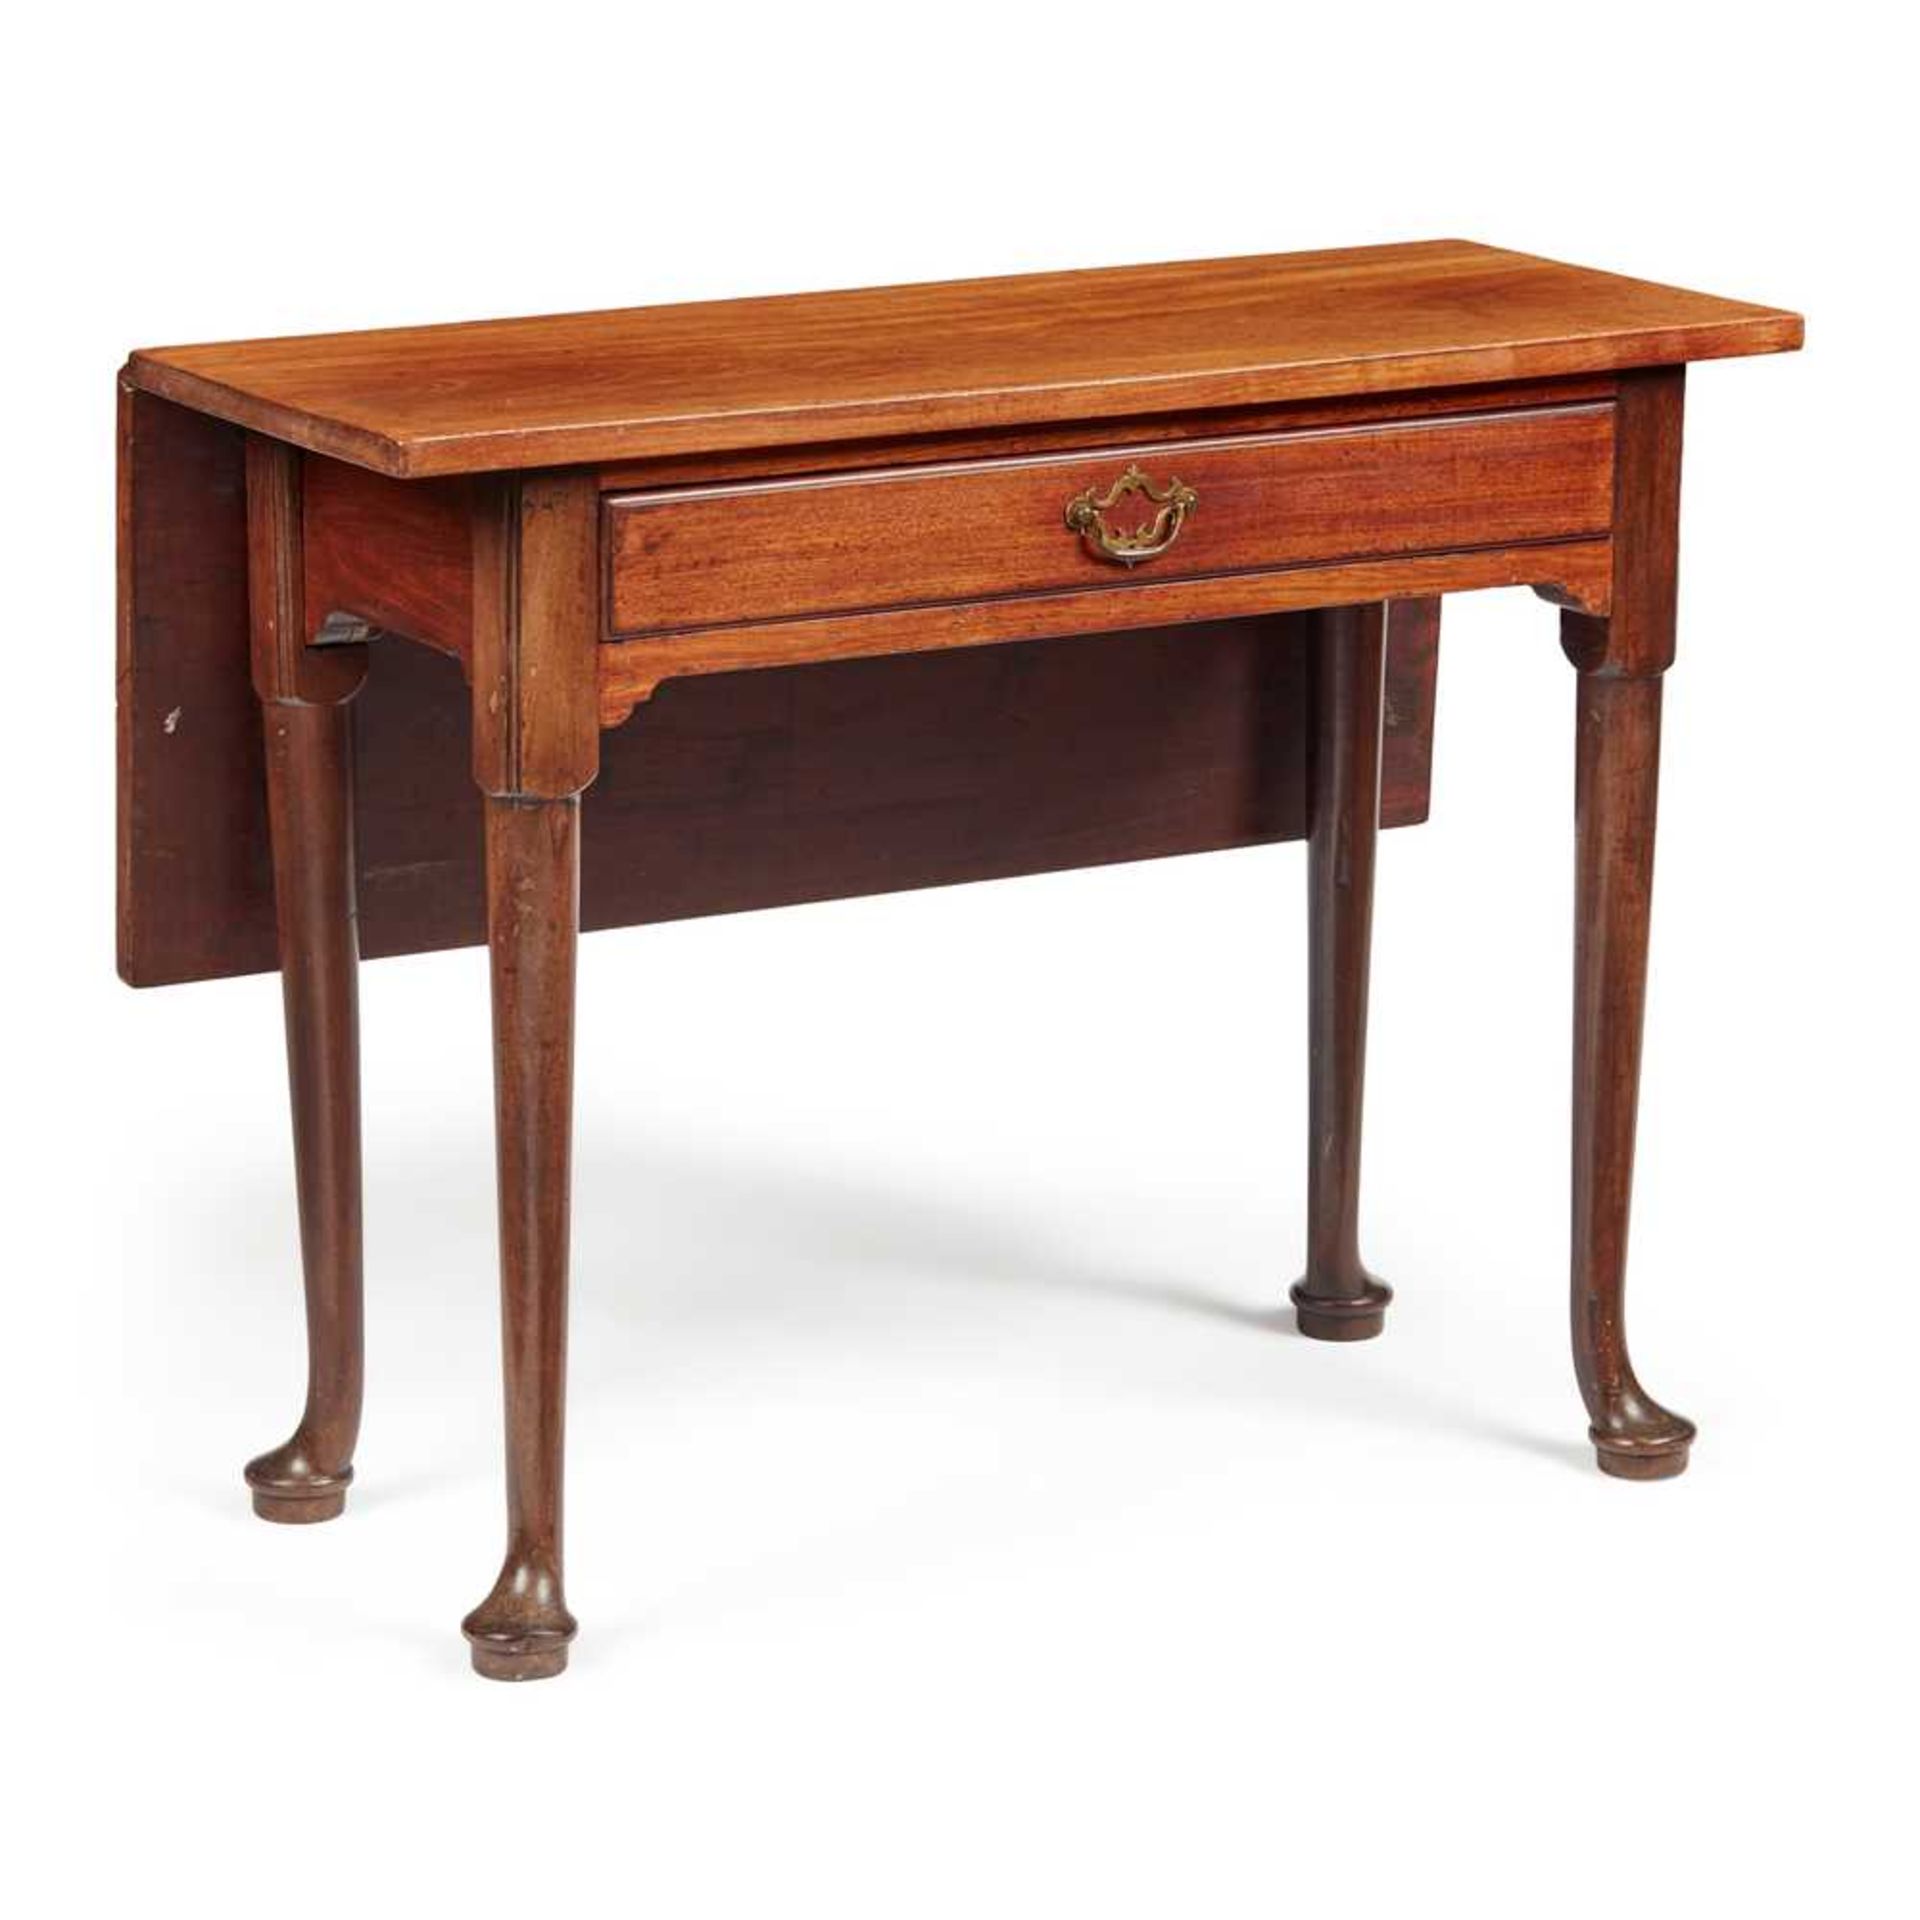 A GEORGE II MAHOGANY DROP-LEAF BEDROOM TABLE, IN THE MANNER OF ALEXANDER PETER MID 18TH CENTURY